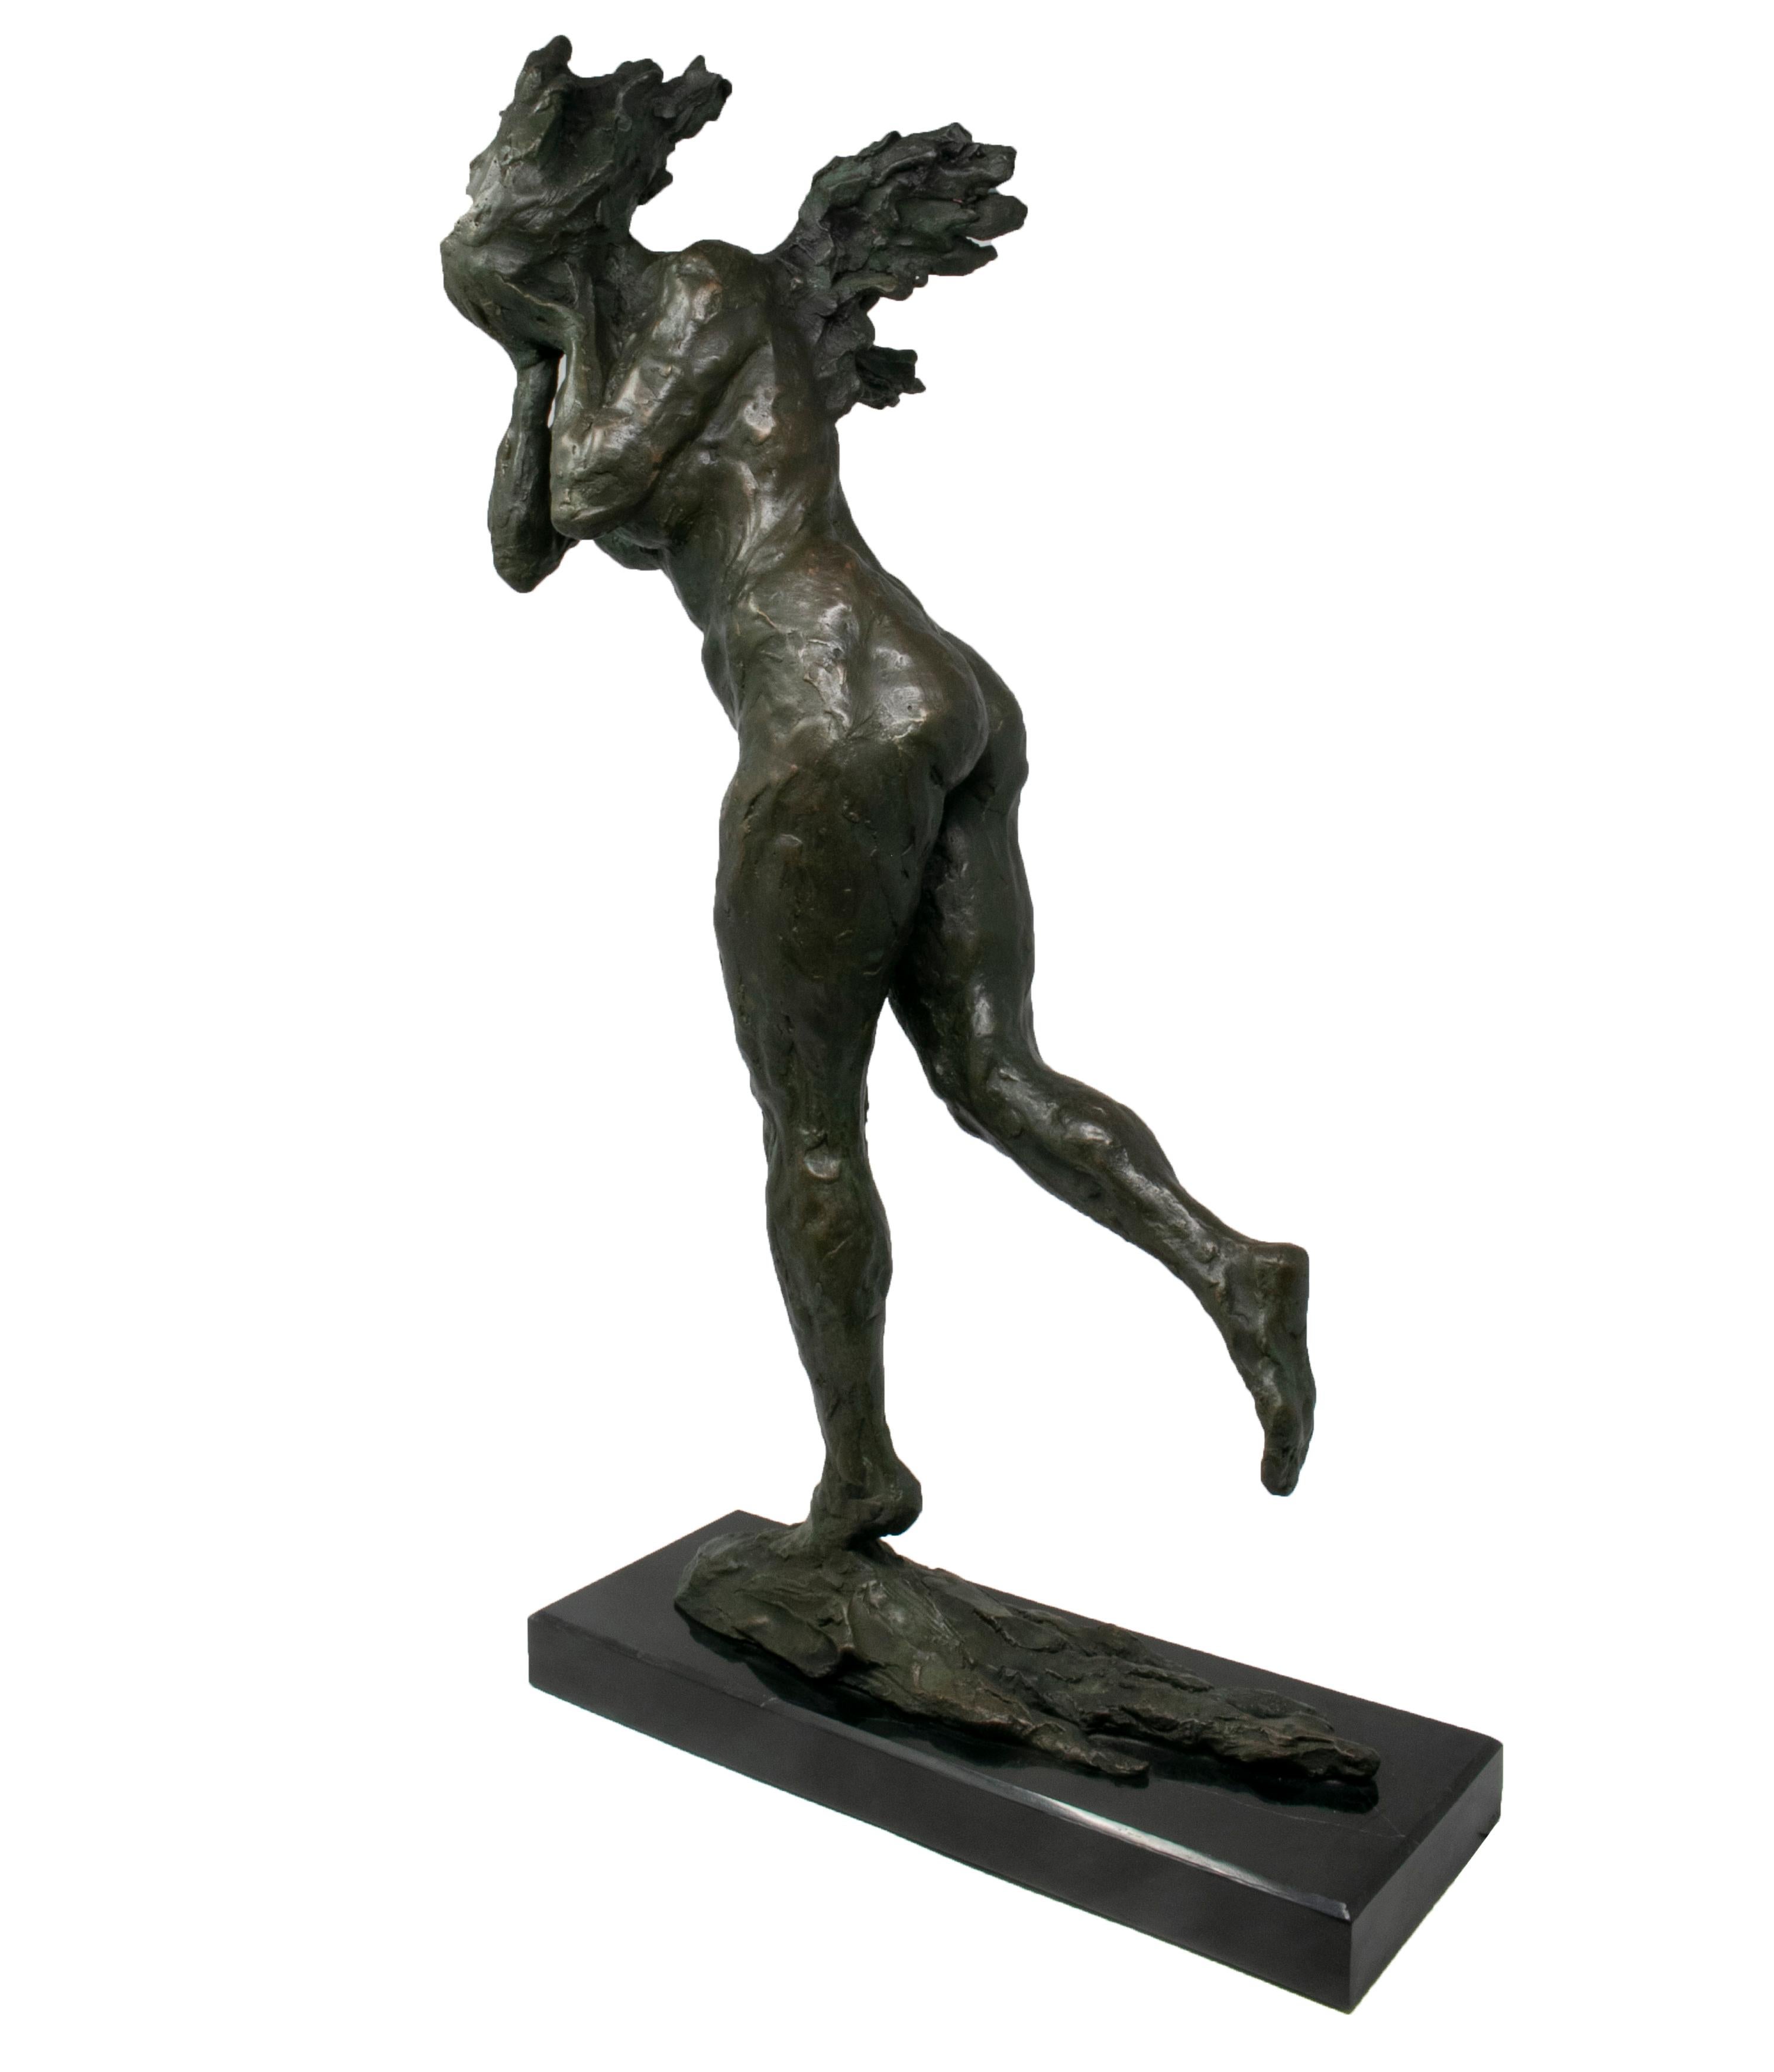 1990s abstract bronze figure of a woman running whilst covering her face, on a black marble base.